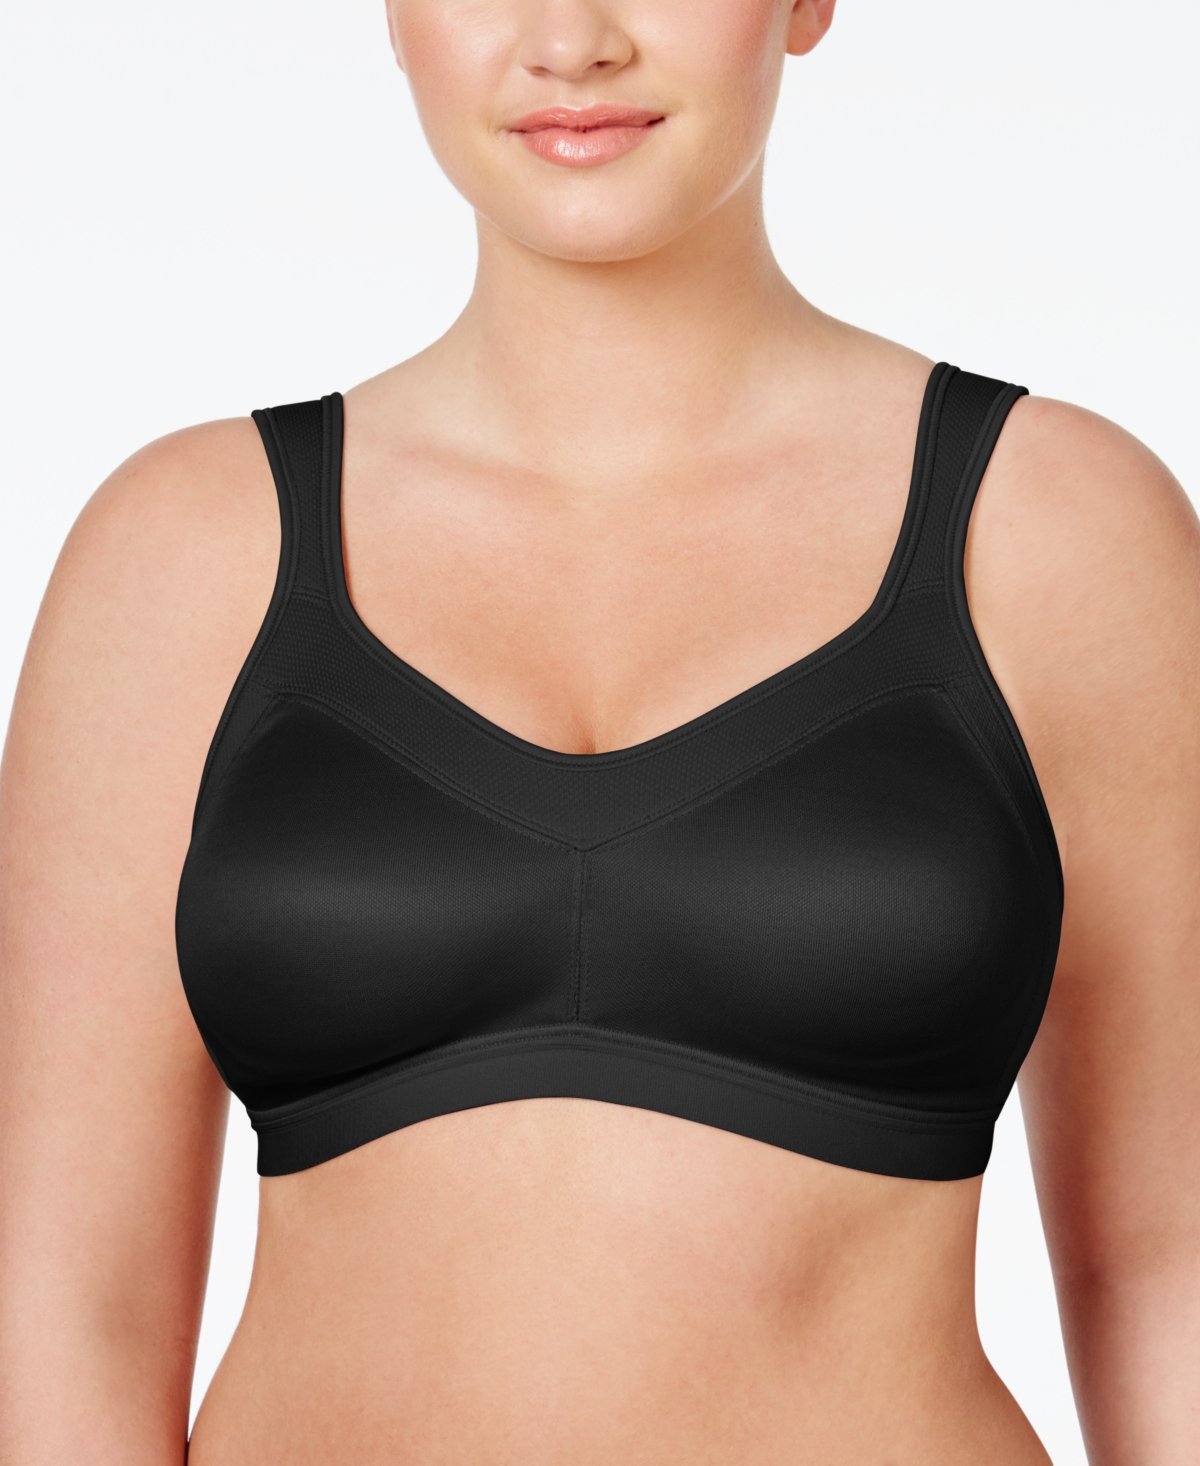 18 Hour Active Lifestyle Low Impact Wireless Bra 4159, Online only - Black